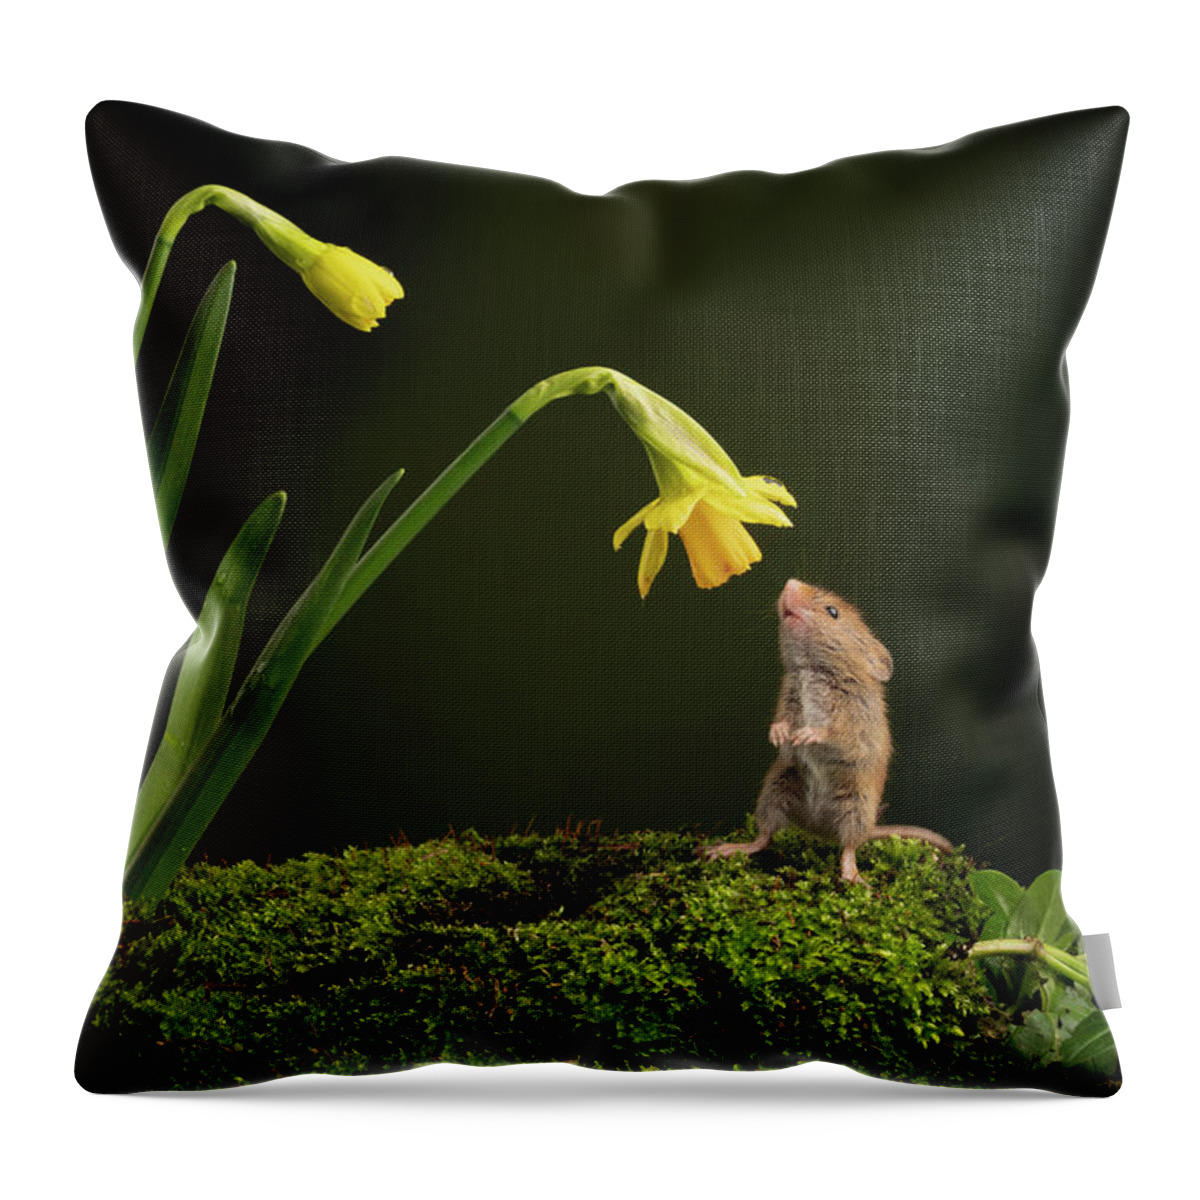 Harvest Throw Pillow featuring the photograph HMdaff03443 by Miles Herbert